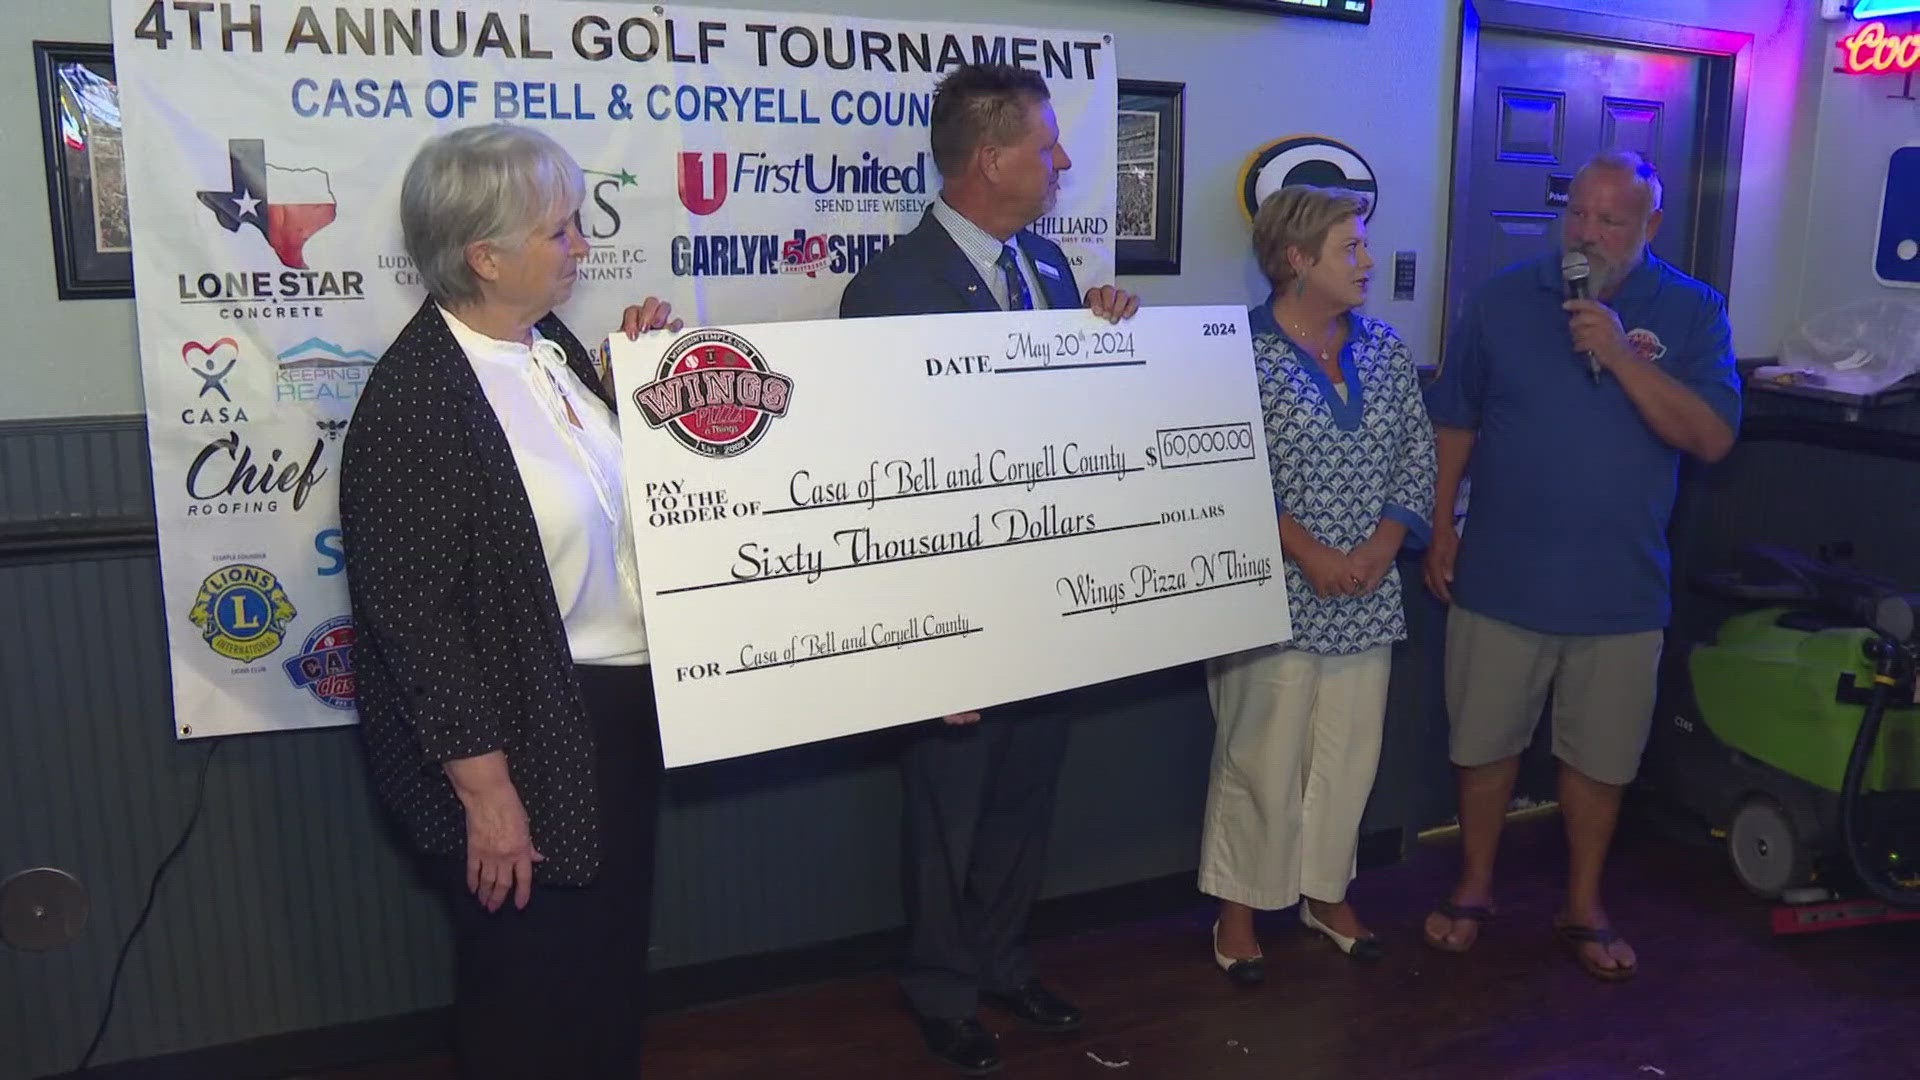 Mike and Sara Dent and Wings, Pizza N Things set a new record by giving the largest single donation to CASA to date through the annual tournament.